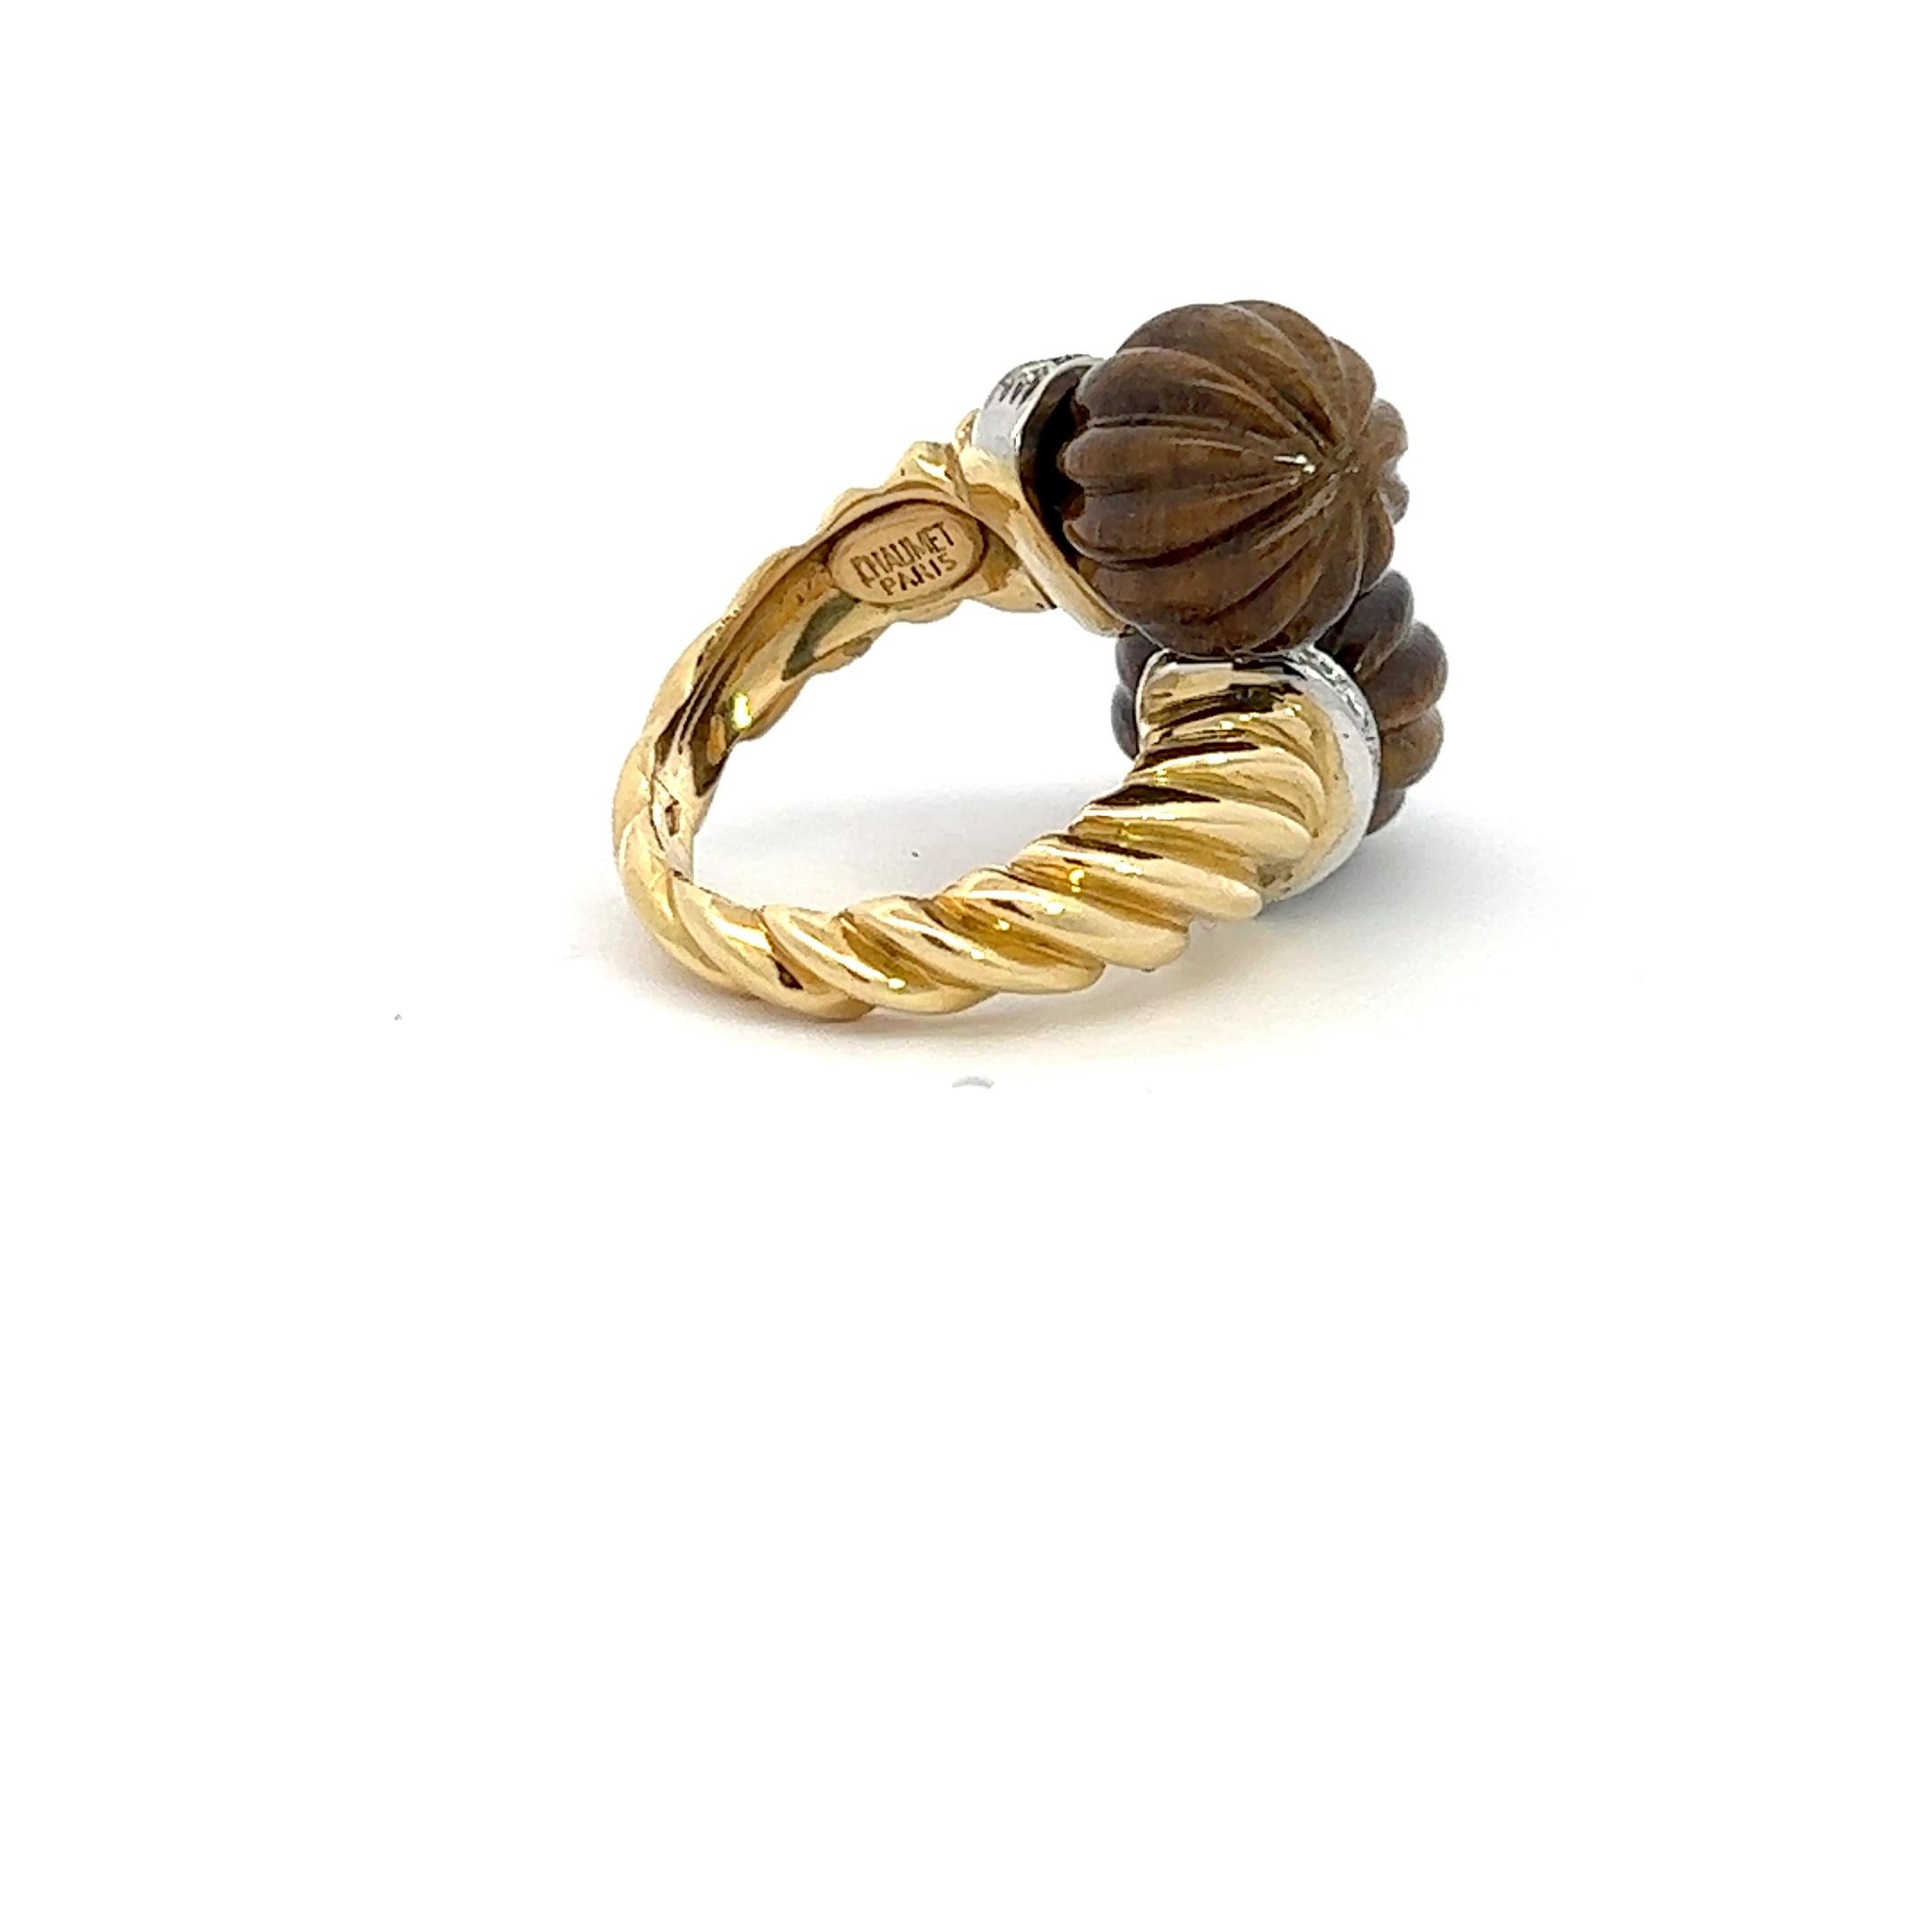 An 18k yellow gold ring by Chaumet.
The ring is decorated with 2 carved pieces of Tiger's Eye Quartz and circa 0.6ct. Diamonds.
Size 57, ring can be resized by a good goldsmith.
Made in France, circa 1970.

Marked with the French hallmark for 18k